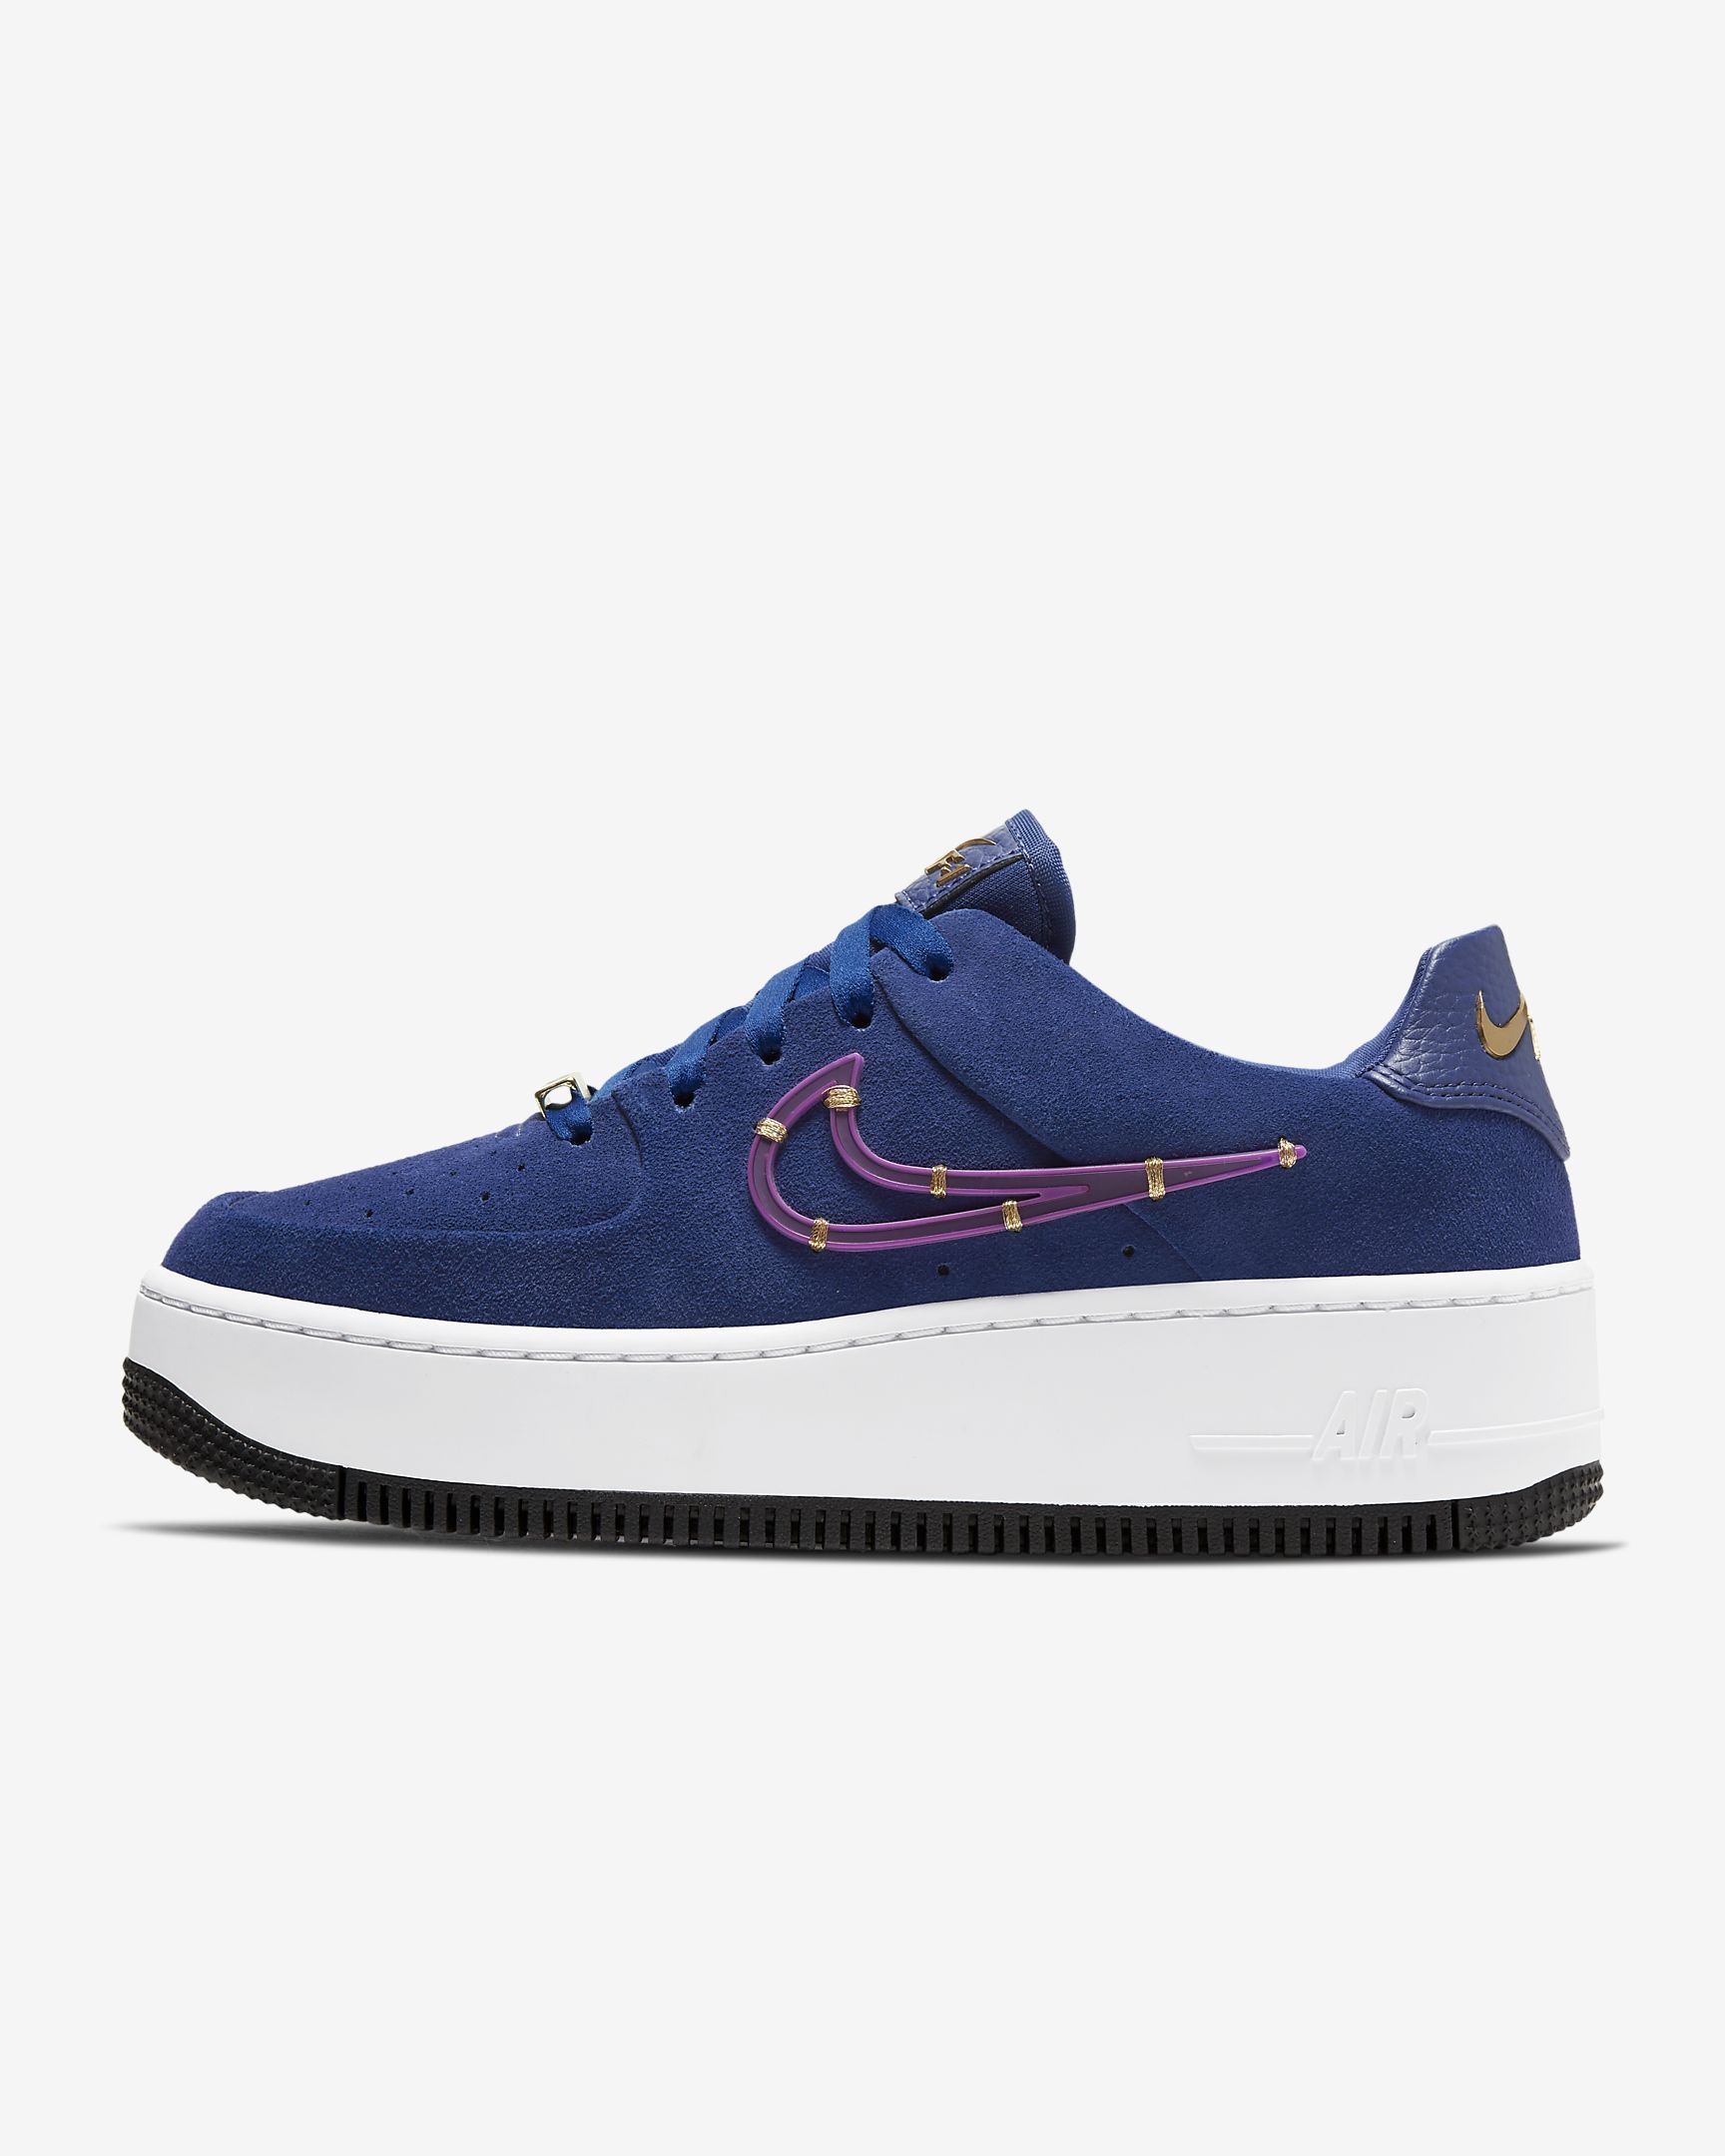 The Best Nike Air Force 1 Sneakers to 